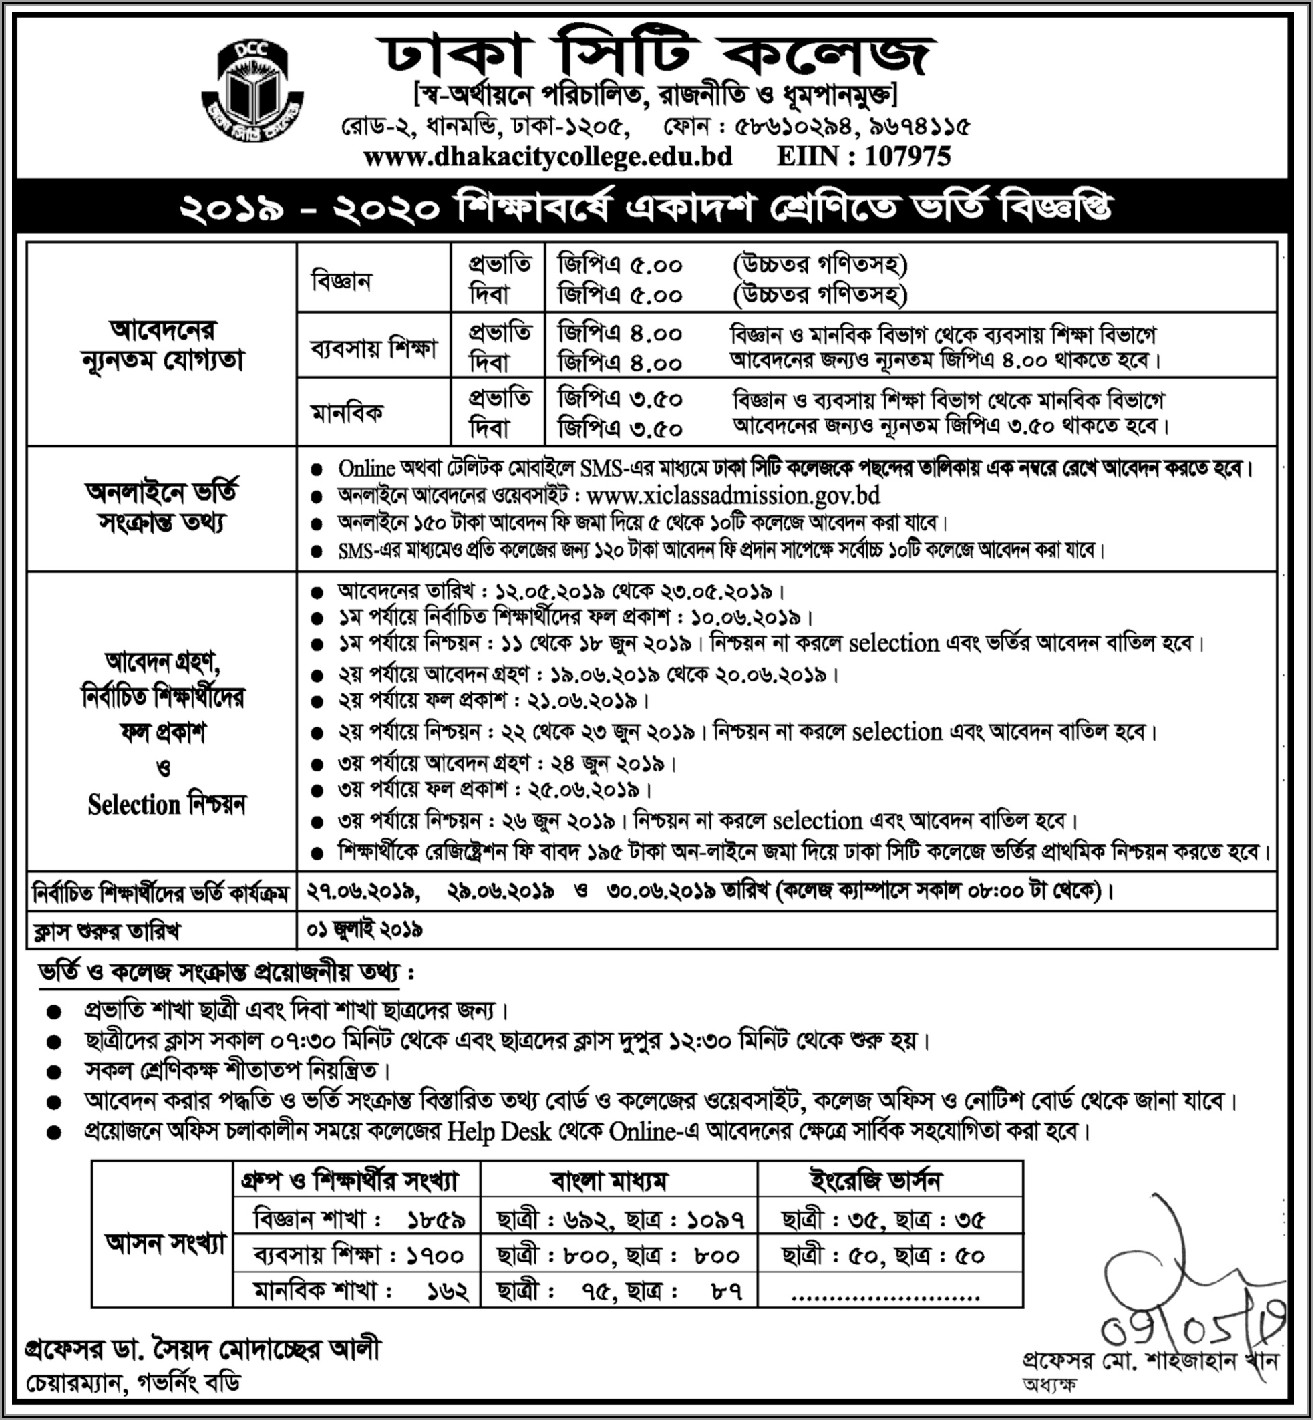 Dhaka City College Admission Form